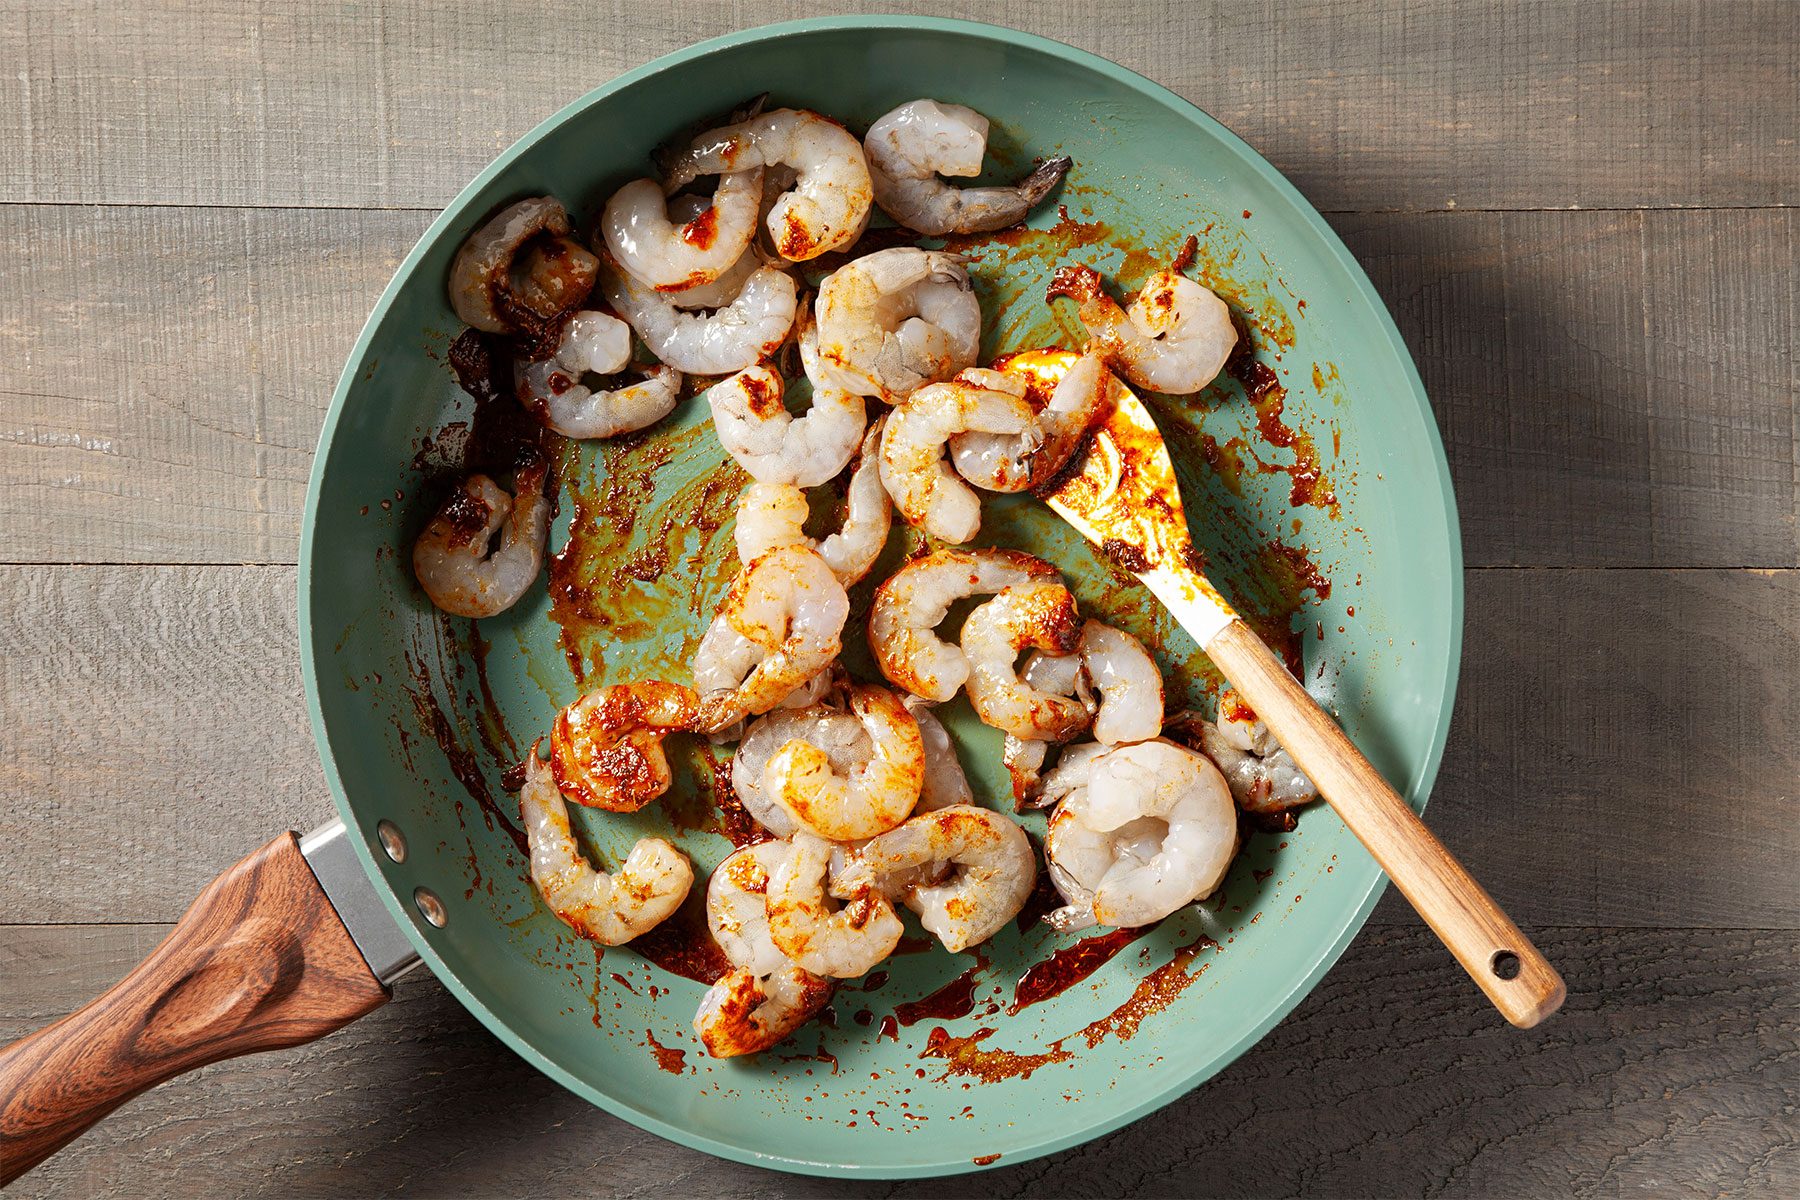 Sauting the shrimp with spices